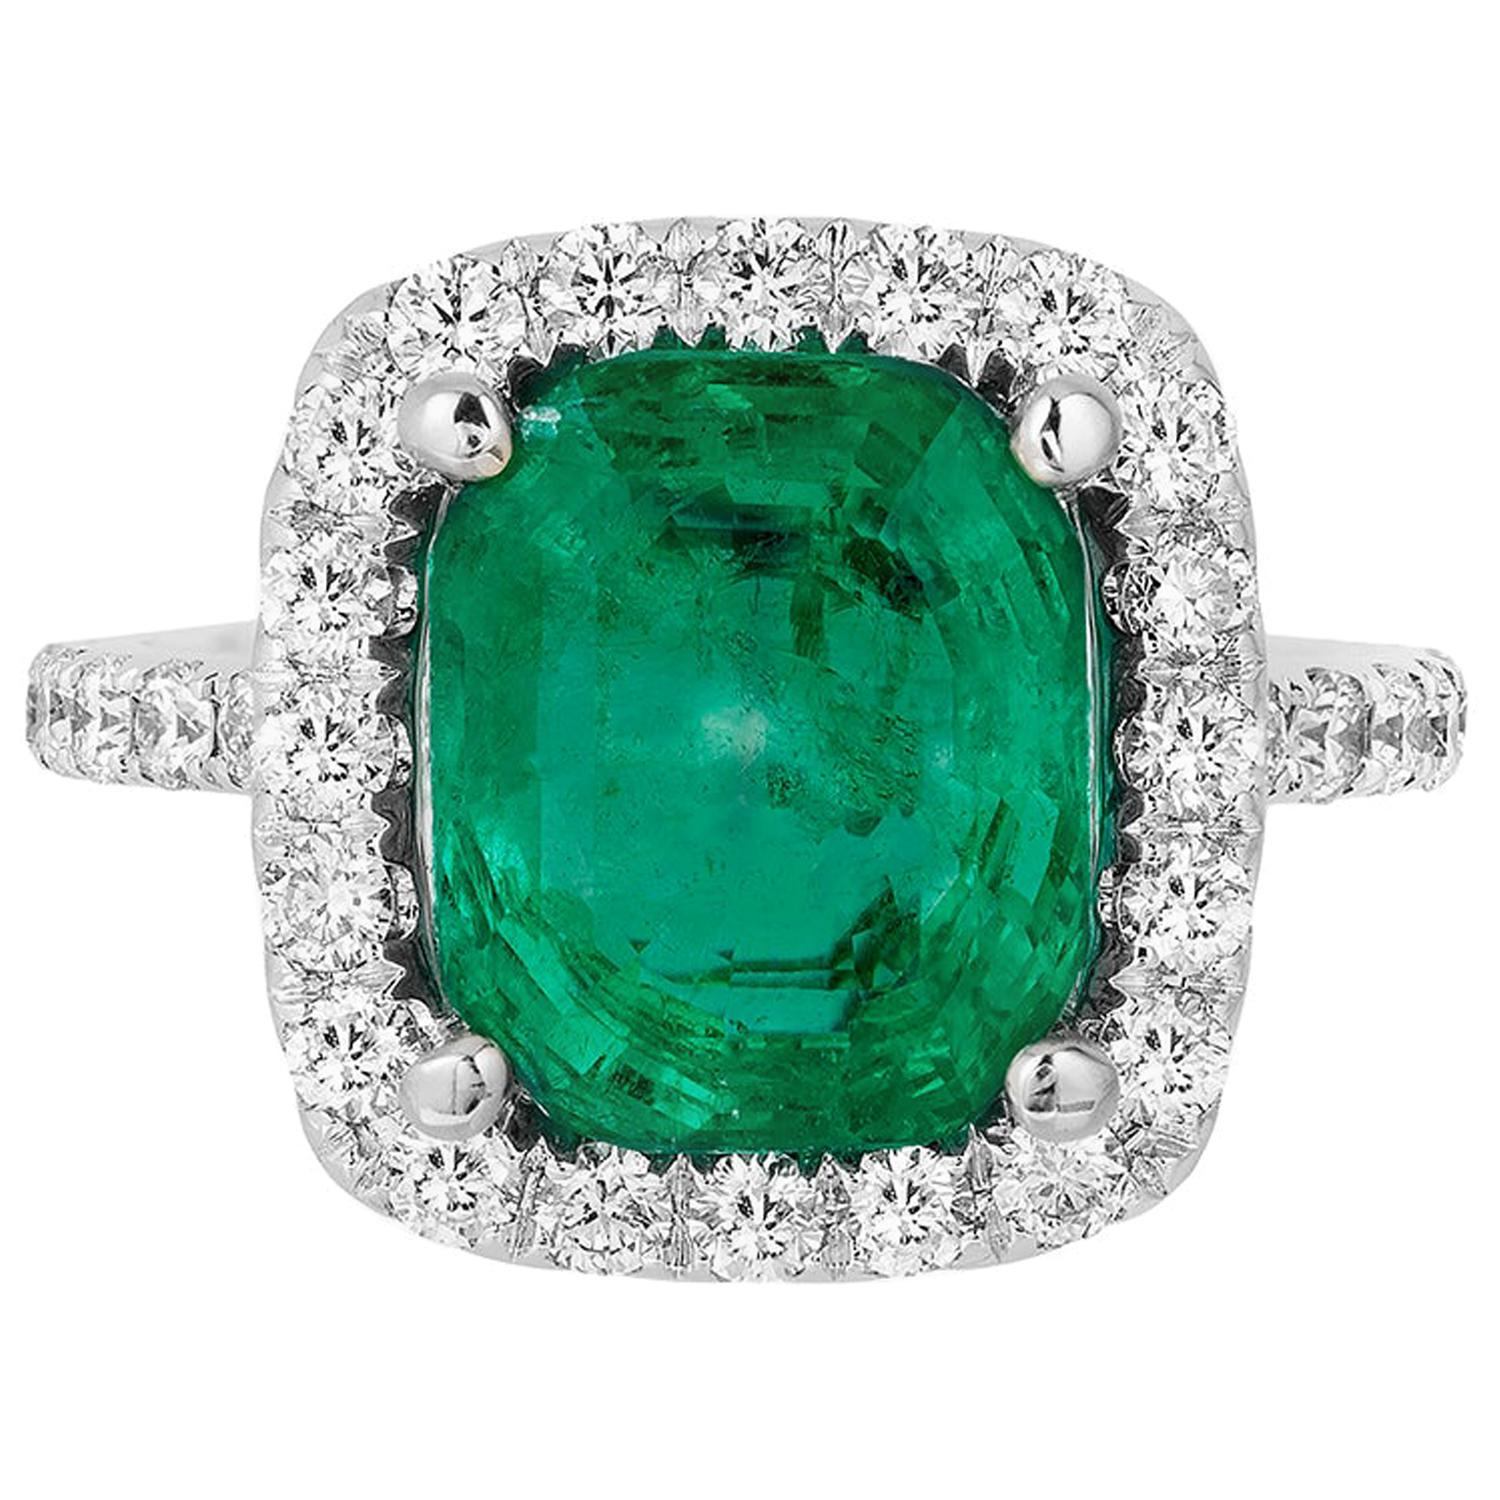 Andreoli 4.07 Carat Colombian Emerald CDC Certified Diamond Ring 18 Karat For Sale